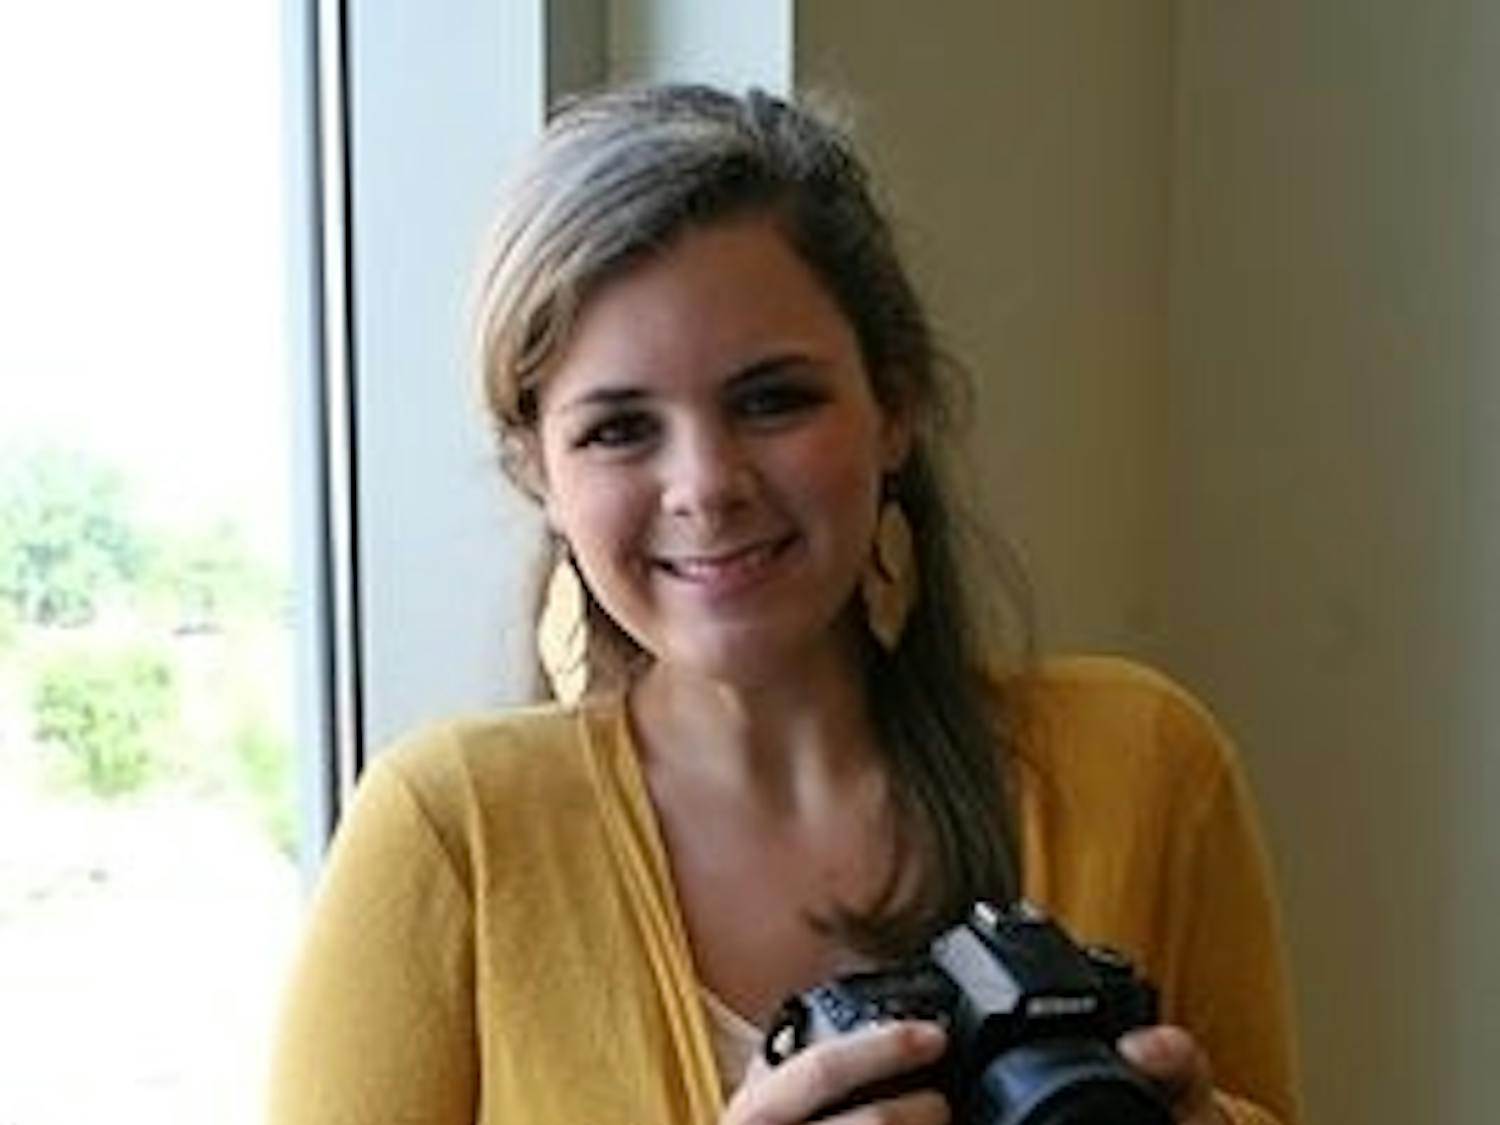 Laurel Schweers has been taking photographs since she was 6 years old. (Rebecca Croomes / Photo Editor)